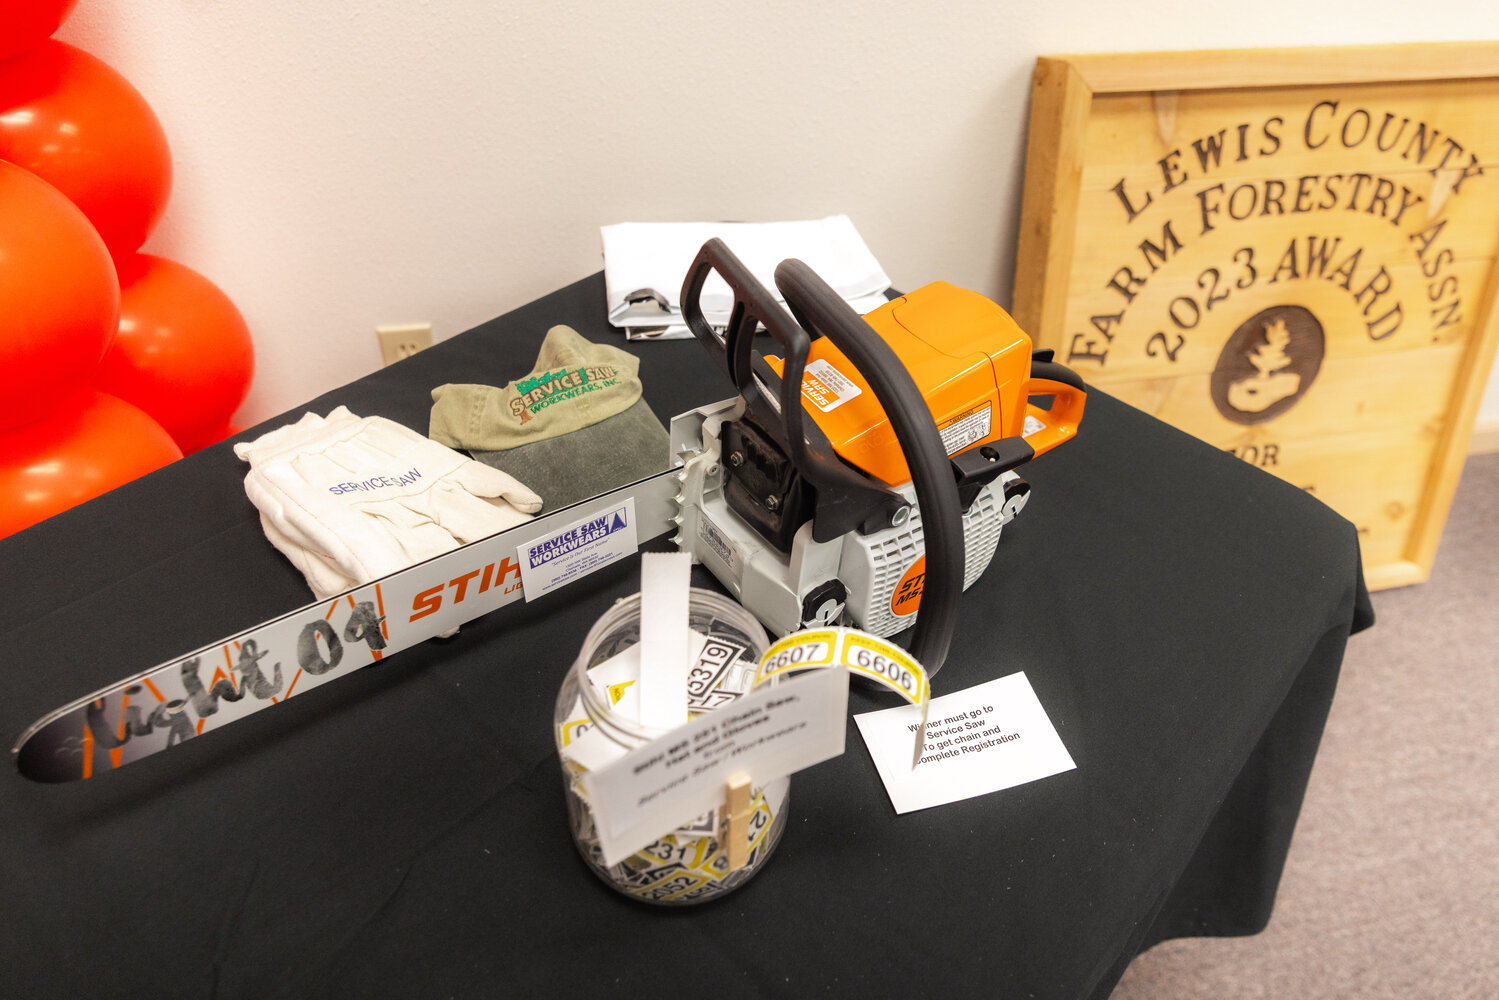 Raffle items sit on display during the Lewis County Farm Forestry Association awards banquet in Chehalis on Tuesday, Nov. 14.